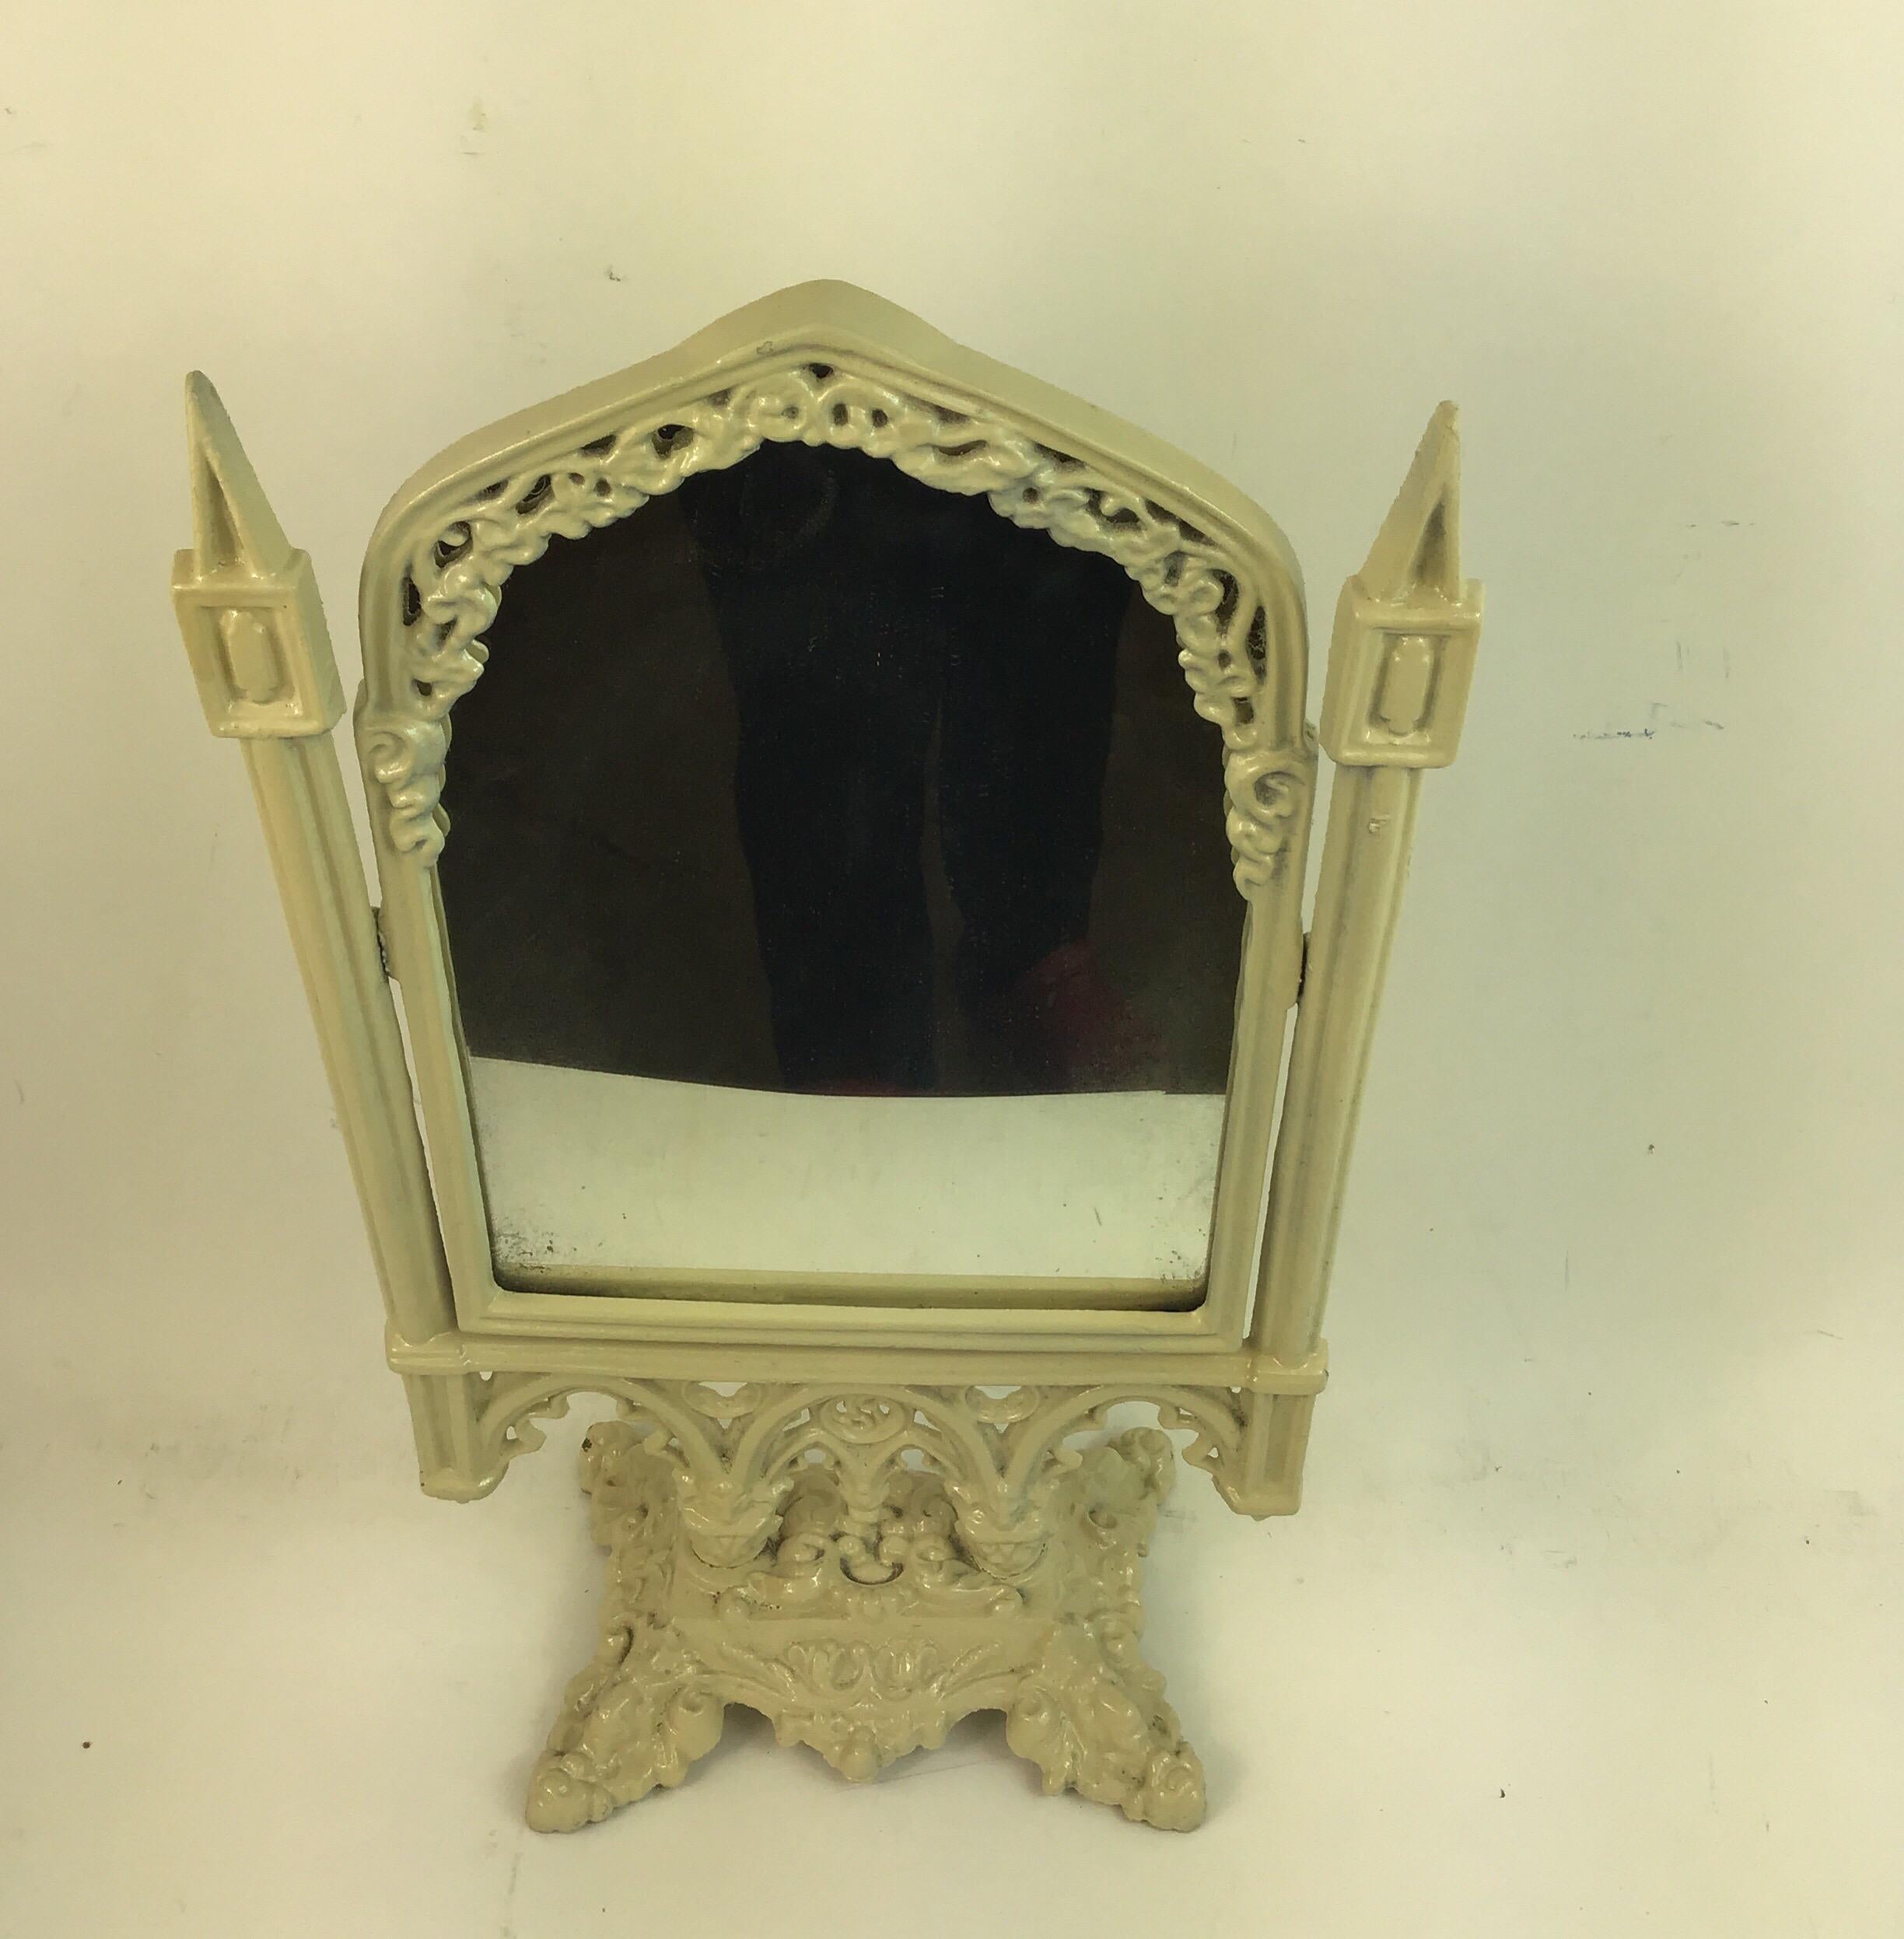 Vanity mirror in cast metal with crème paint finish.